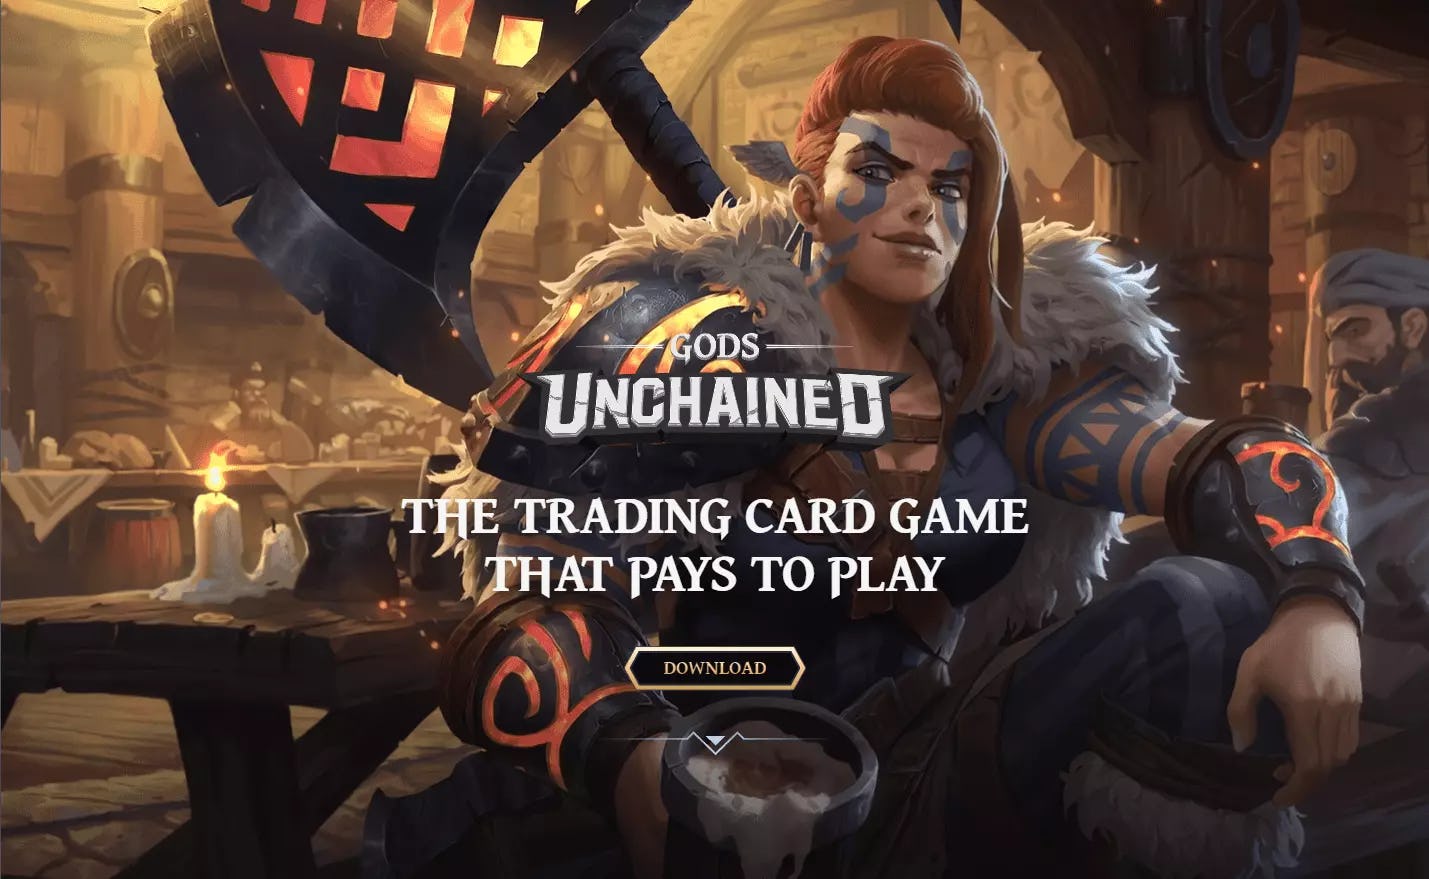 Immortal Game Pivots Away From Web3 Over Cheating Concerns